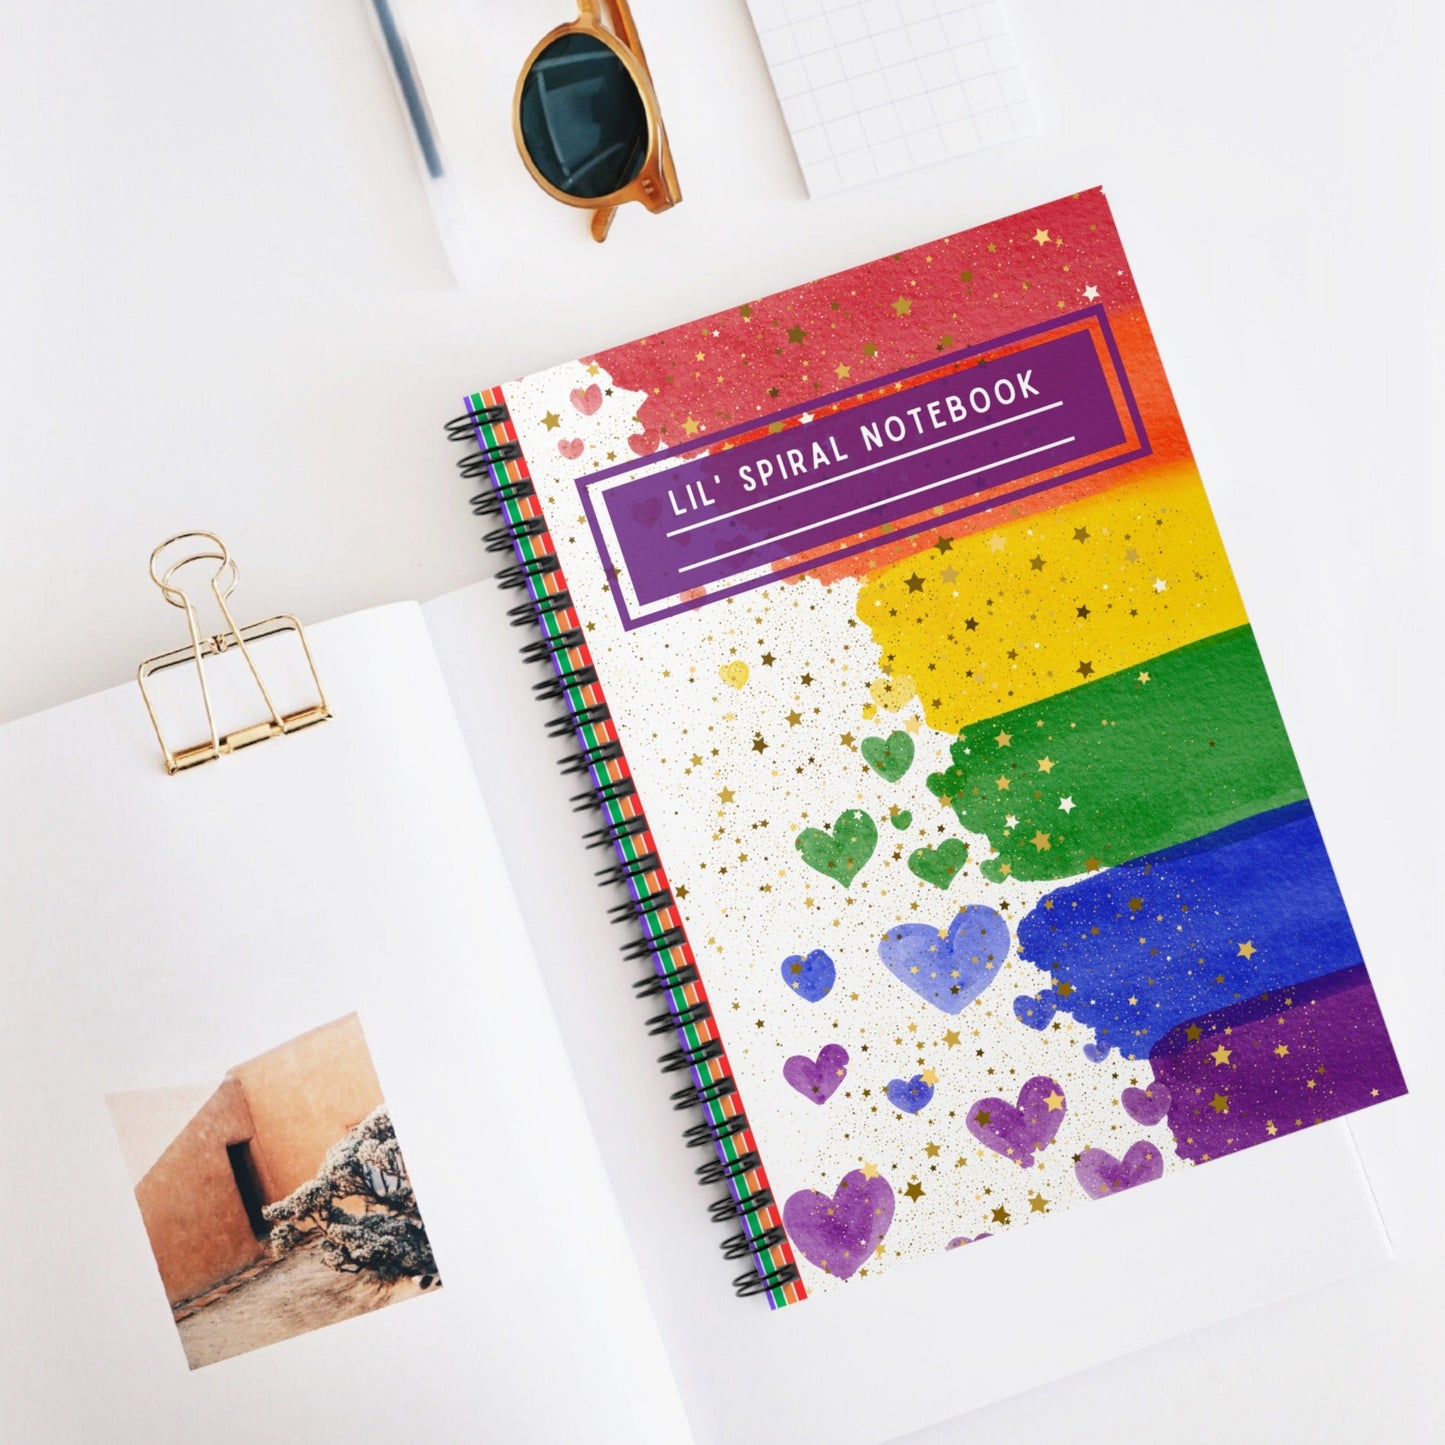 Spiral Notebook Ruled Lines Journal Notebook Stationary Gift Durable Cover 6x8 Inches Lil' Sparkling Rainbow